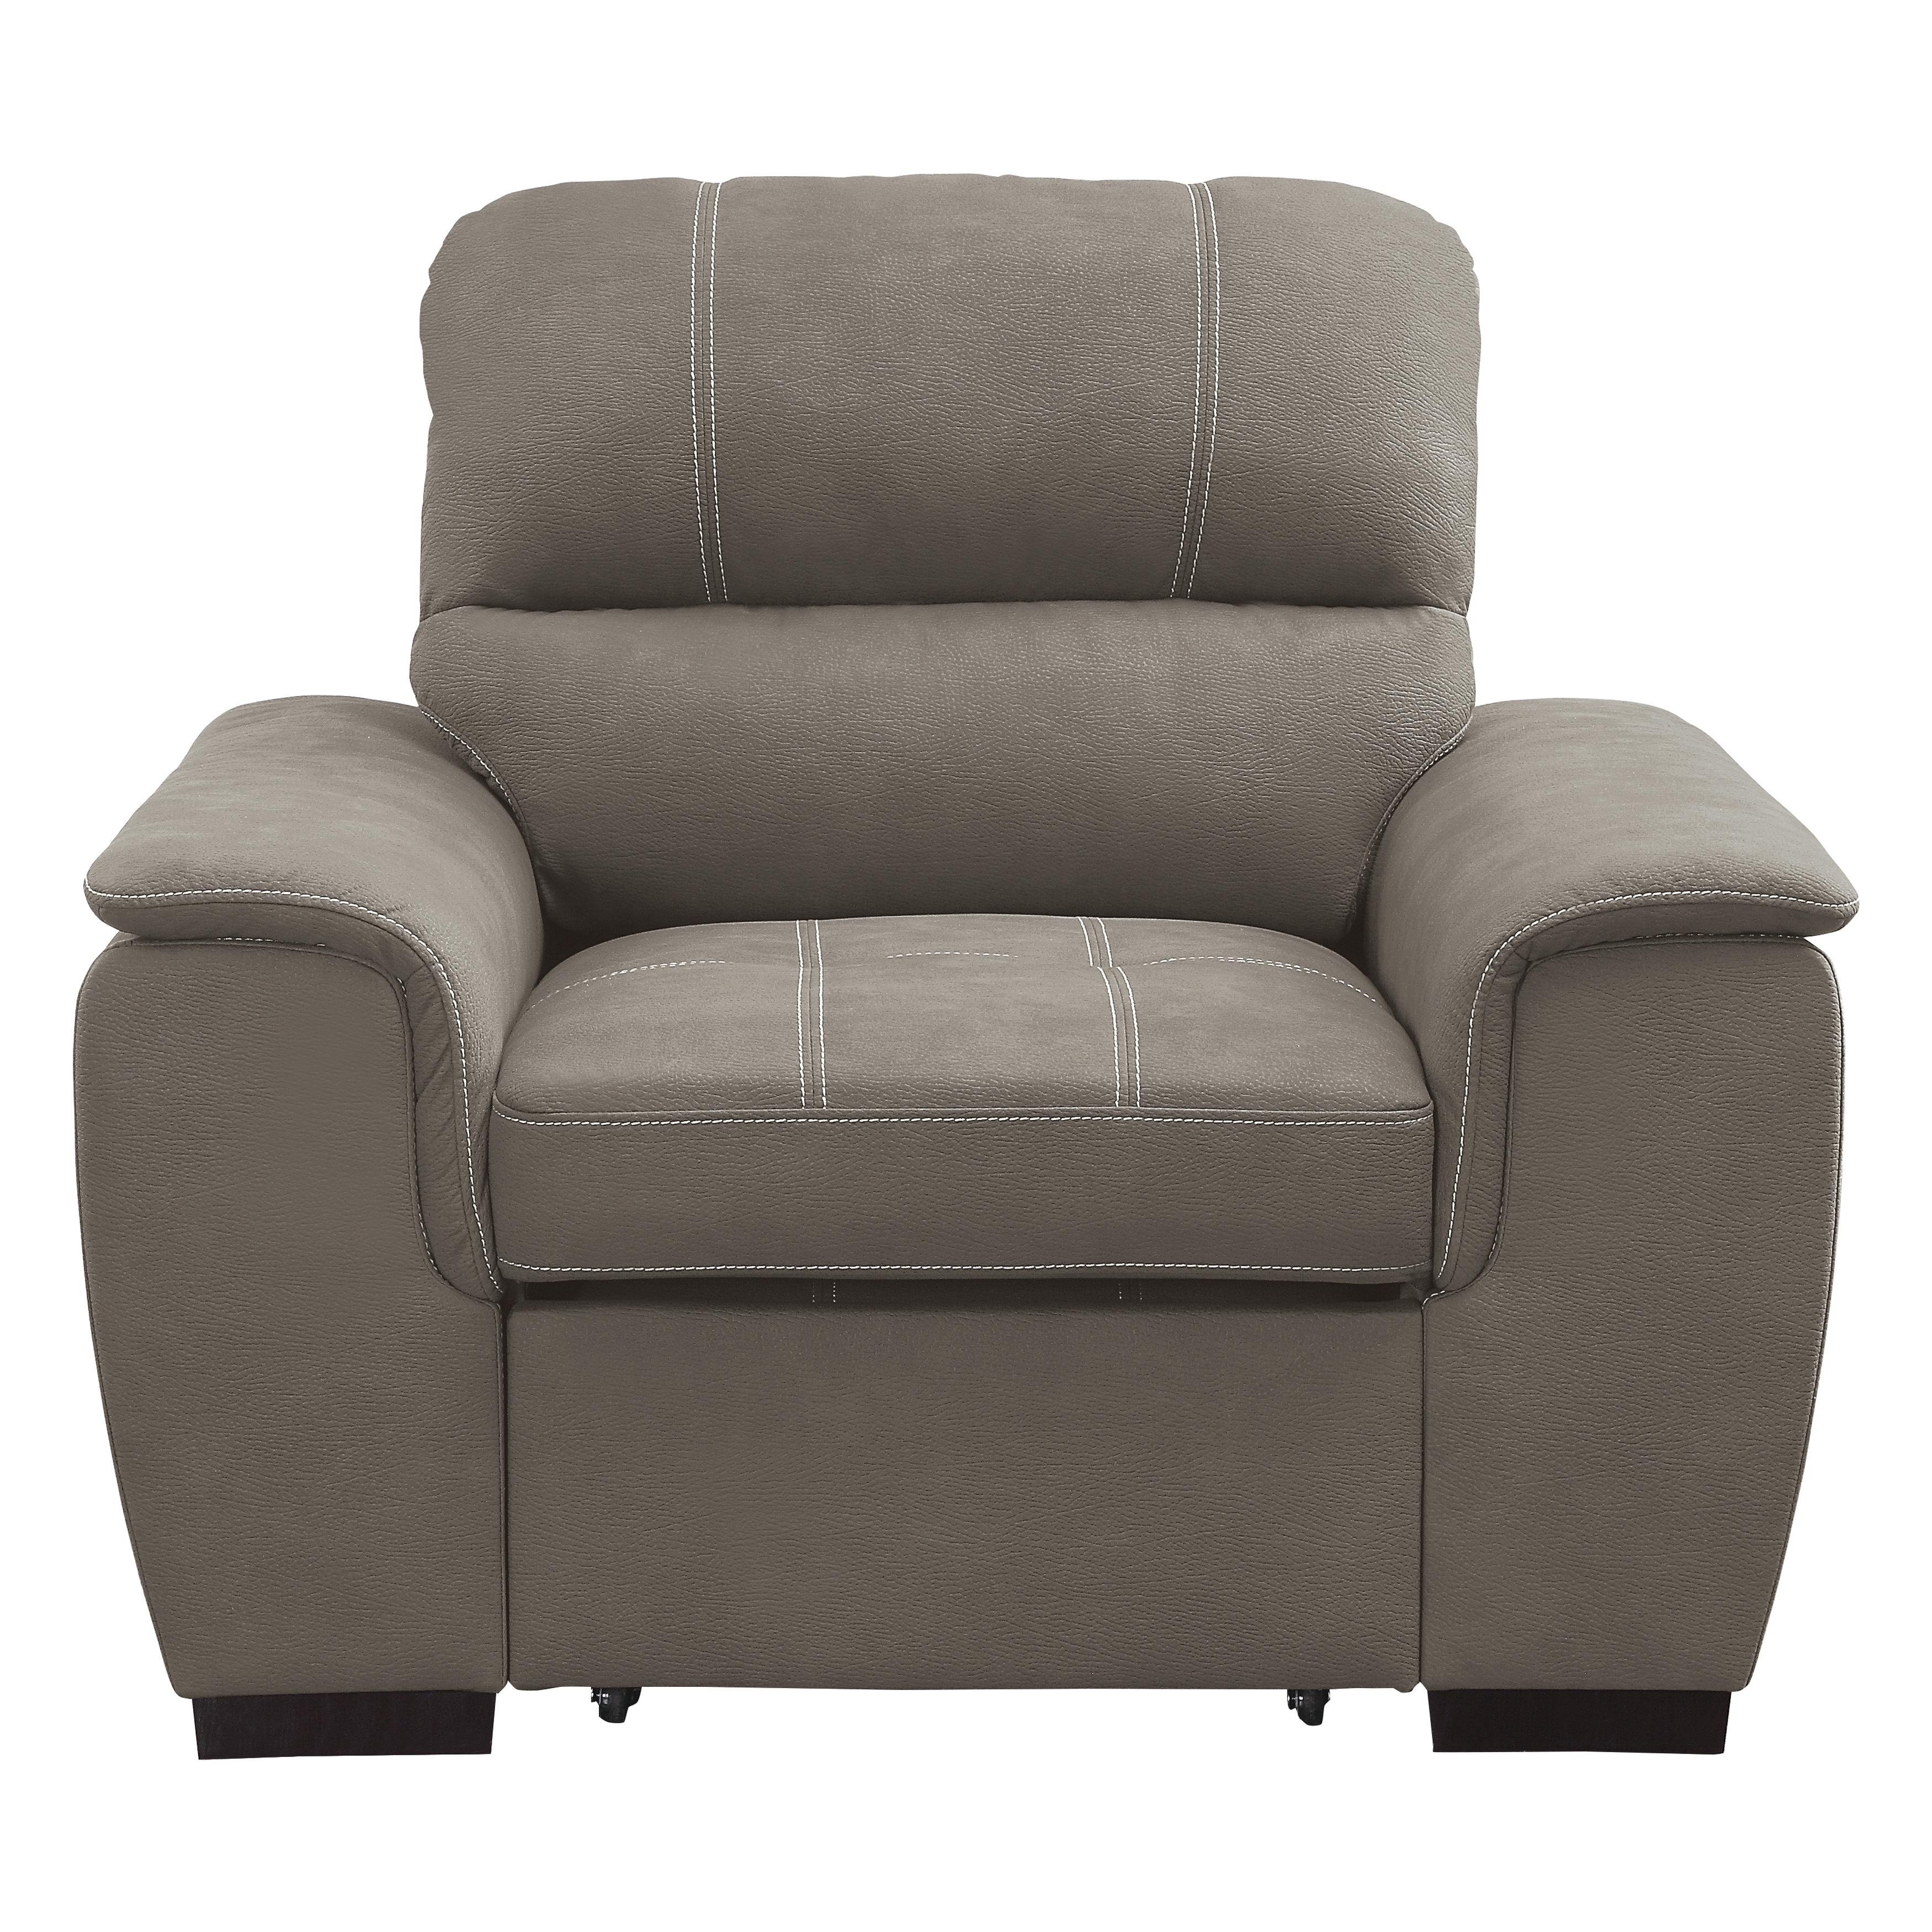 Transitional Arm Chair 9858TP-1 Andes 9858TP-1 in Taupe Microfiber